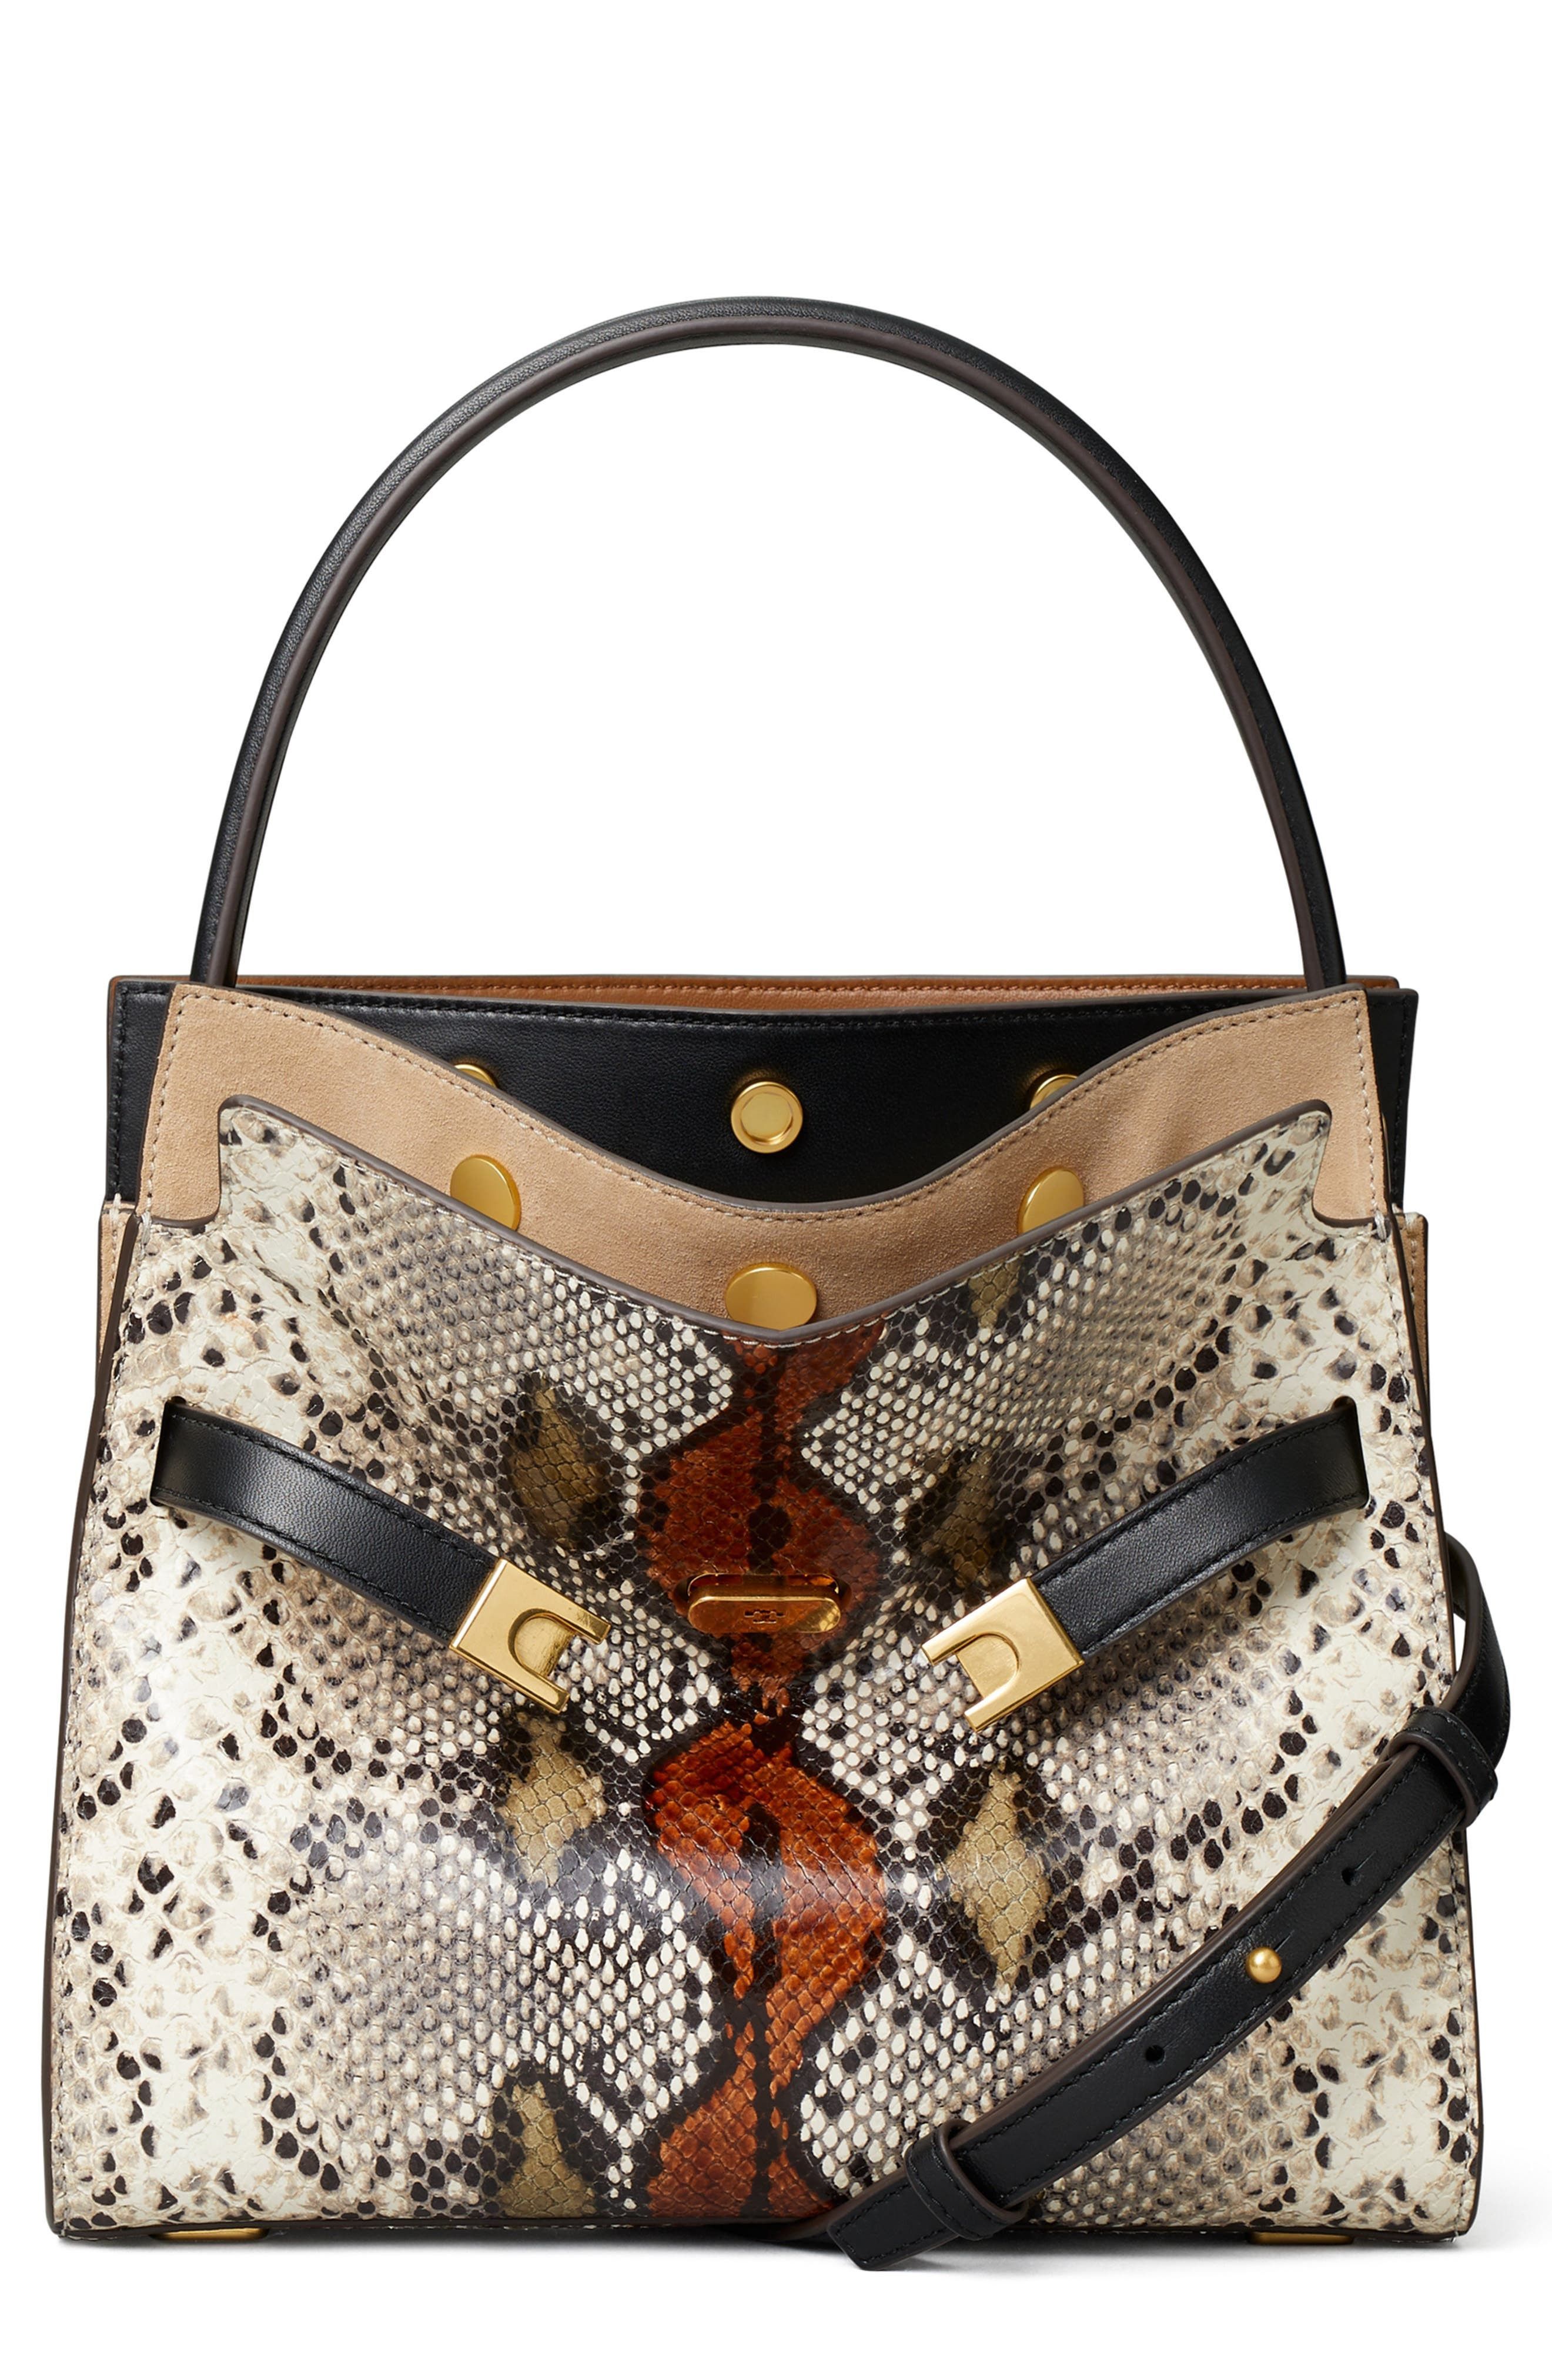 Tory Burch Small Lee Radziwill Snake Embossed Leather Double Bag in Aspen Multi at Nordstrom | Nordstrom